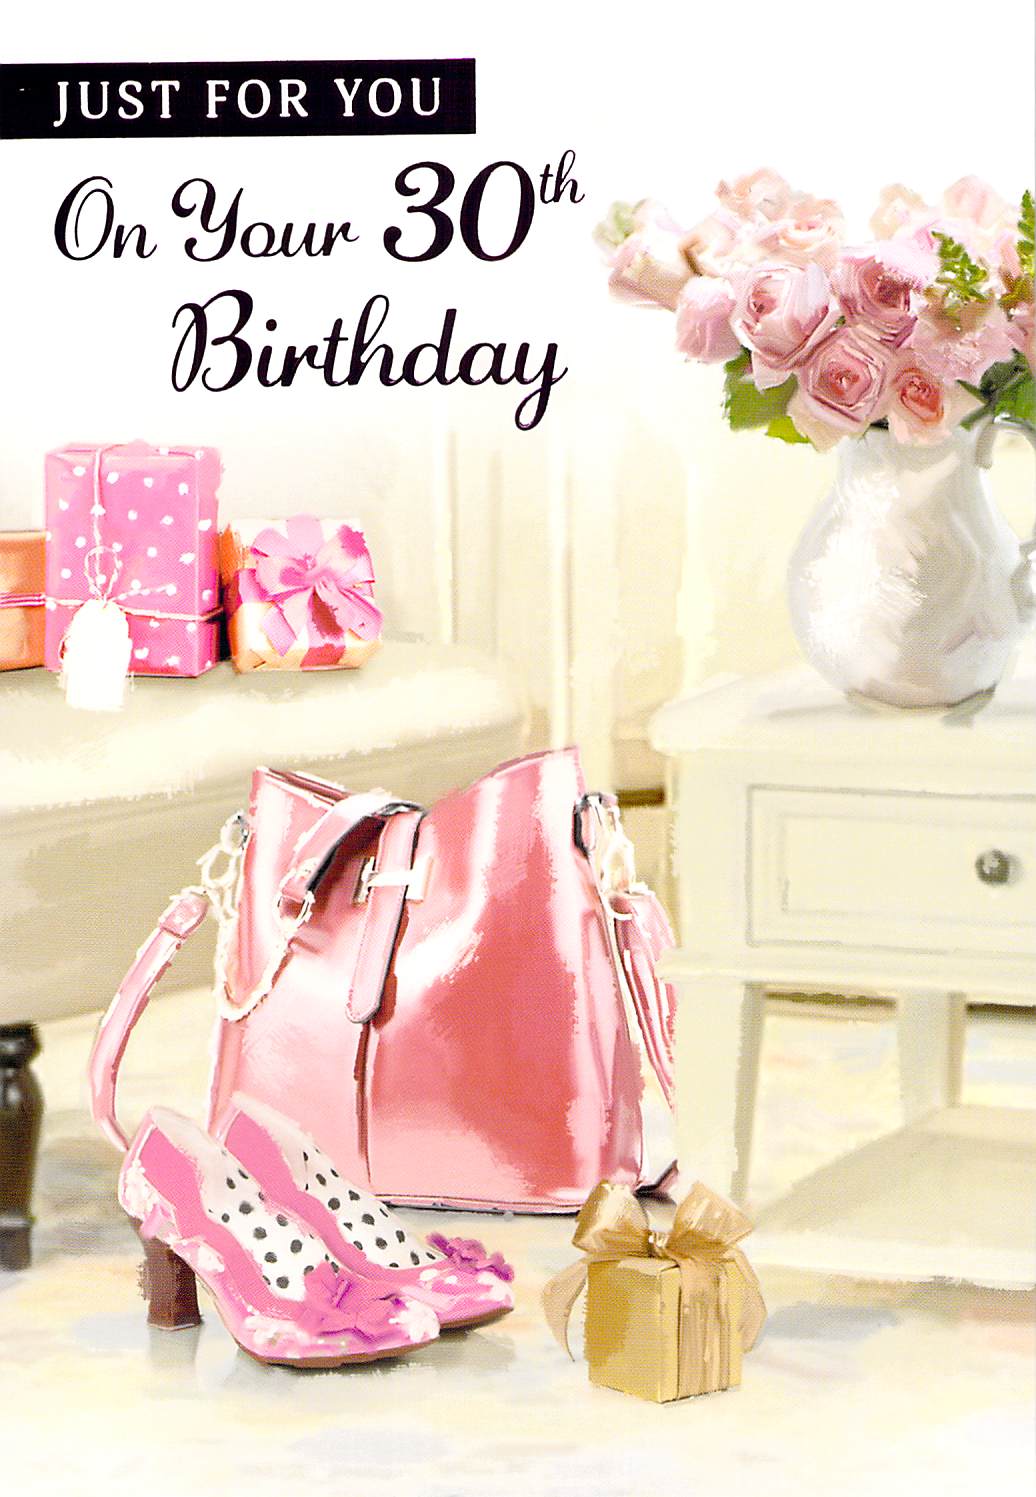 30th Birthday - Age 30 - Greeting Card - Multi Buy Discount - Bag / Shoes